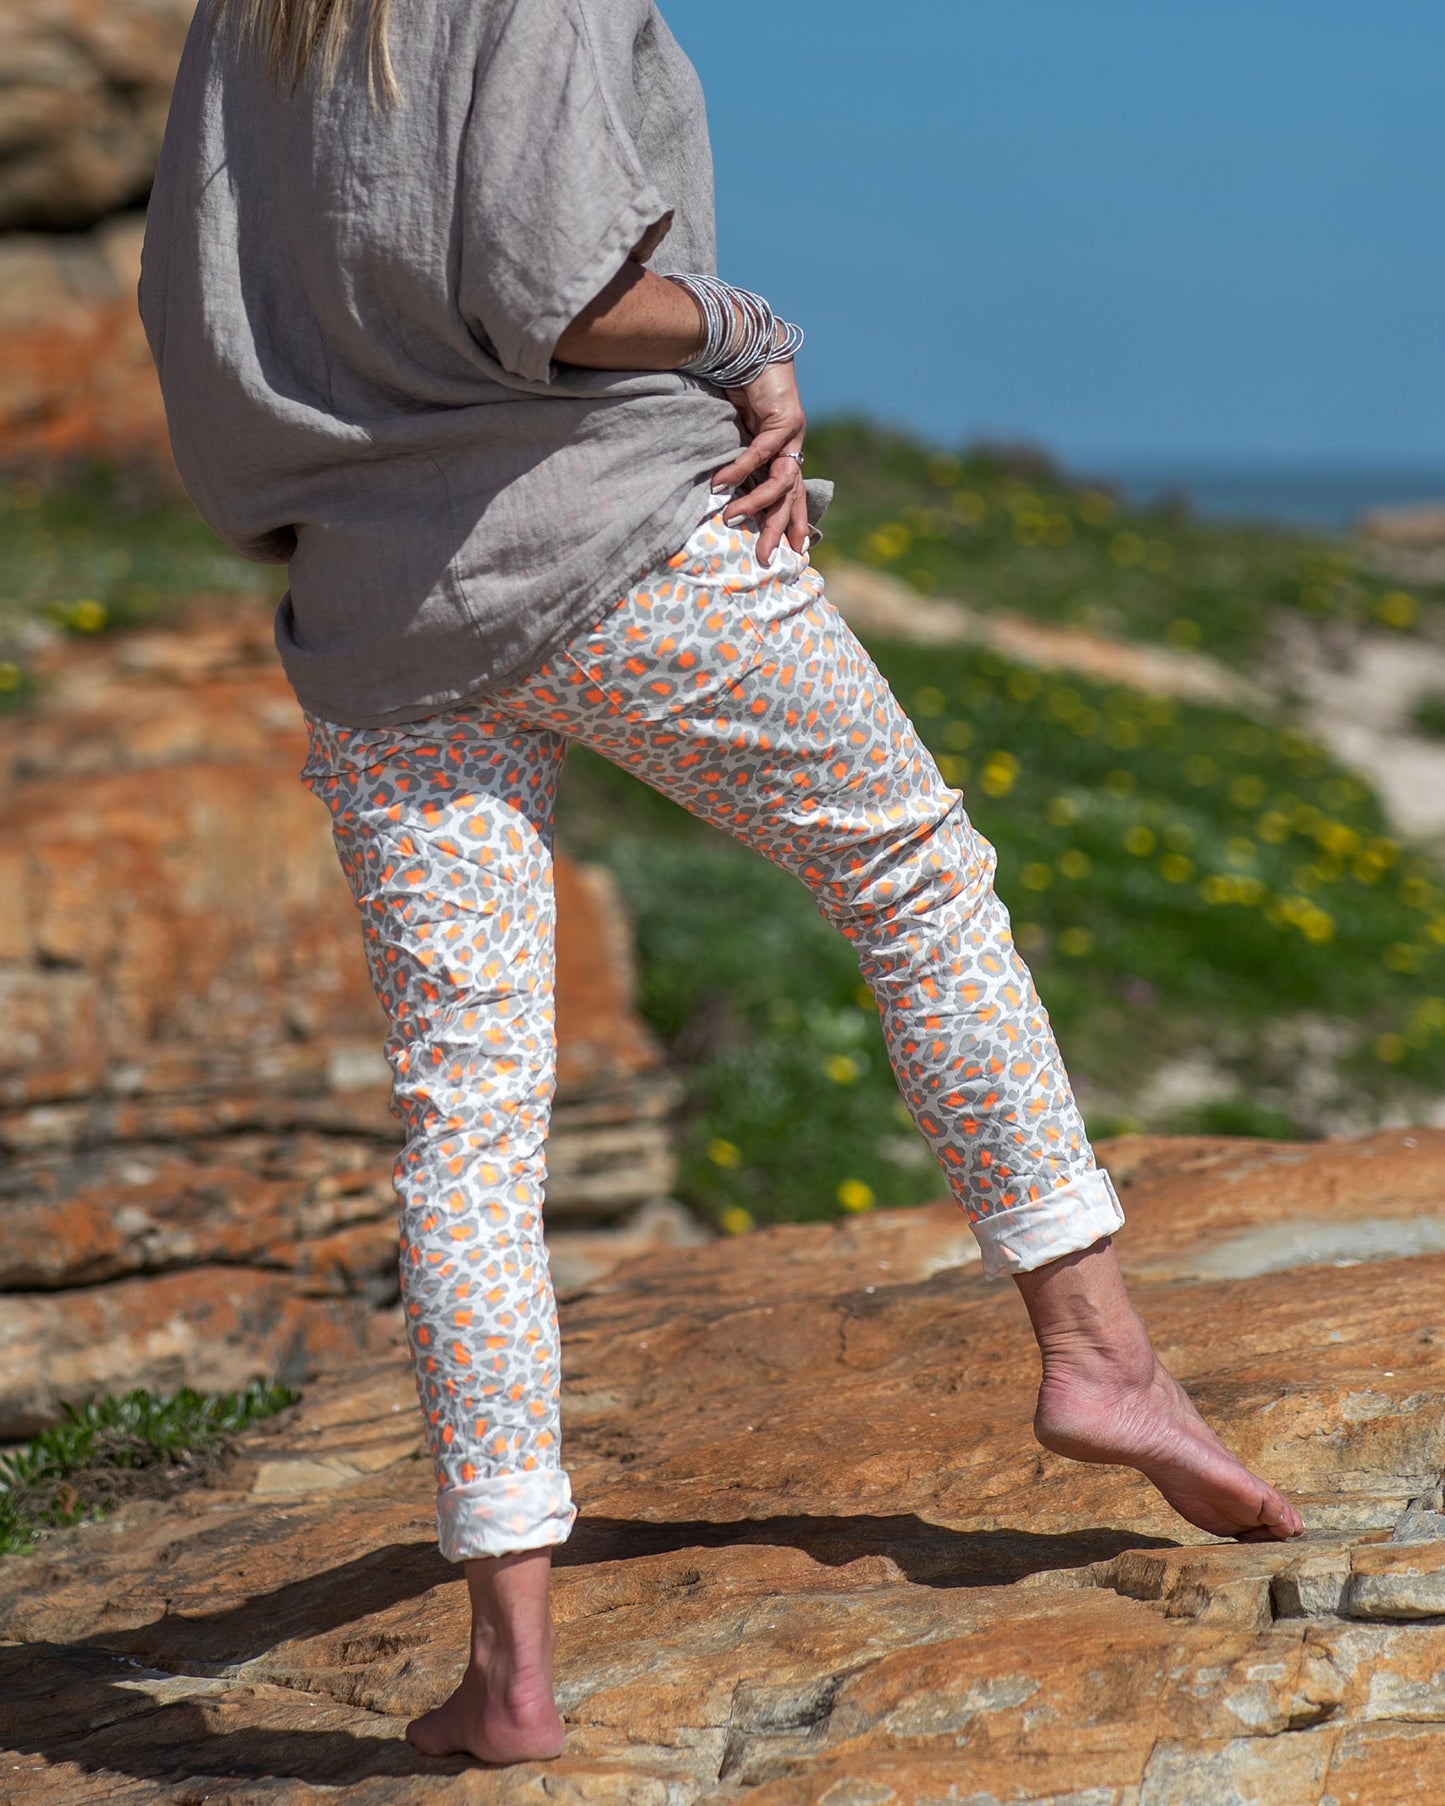 Available in a range of vibrant luminescence colors, these pants offer a fresh and modern twist on the classic leopard print pattern. The fusion of wild and vivid tones adds an electrifying touch, ensuring you stand out wherever you go